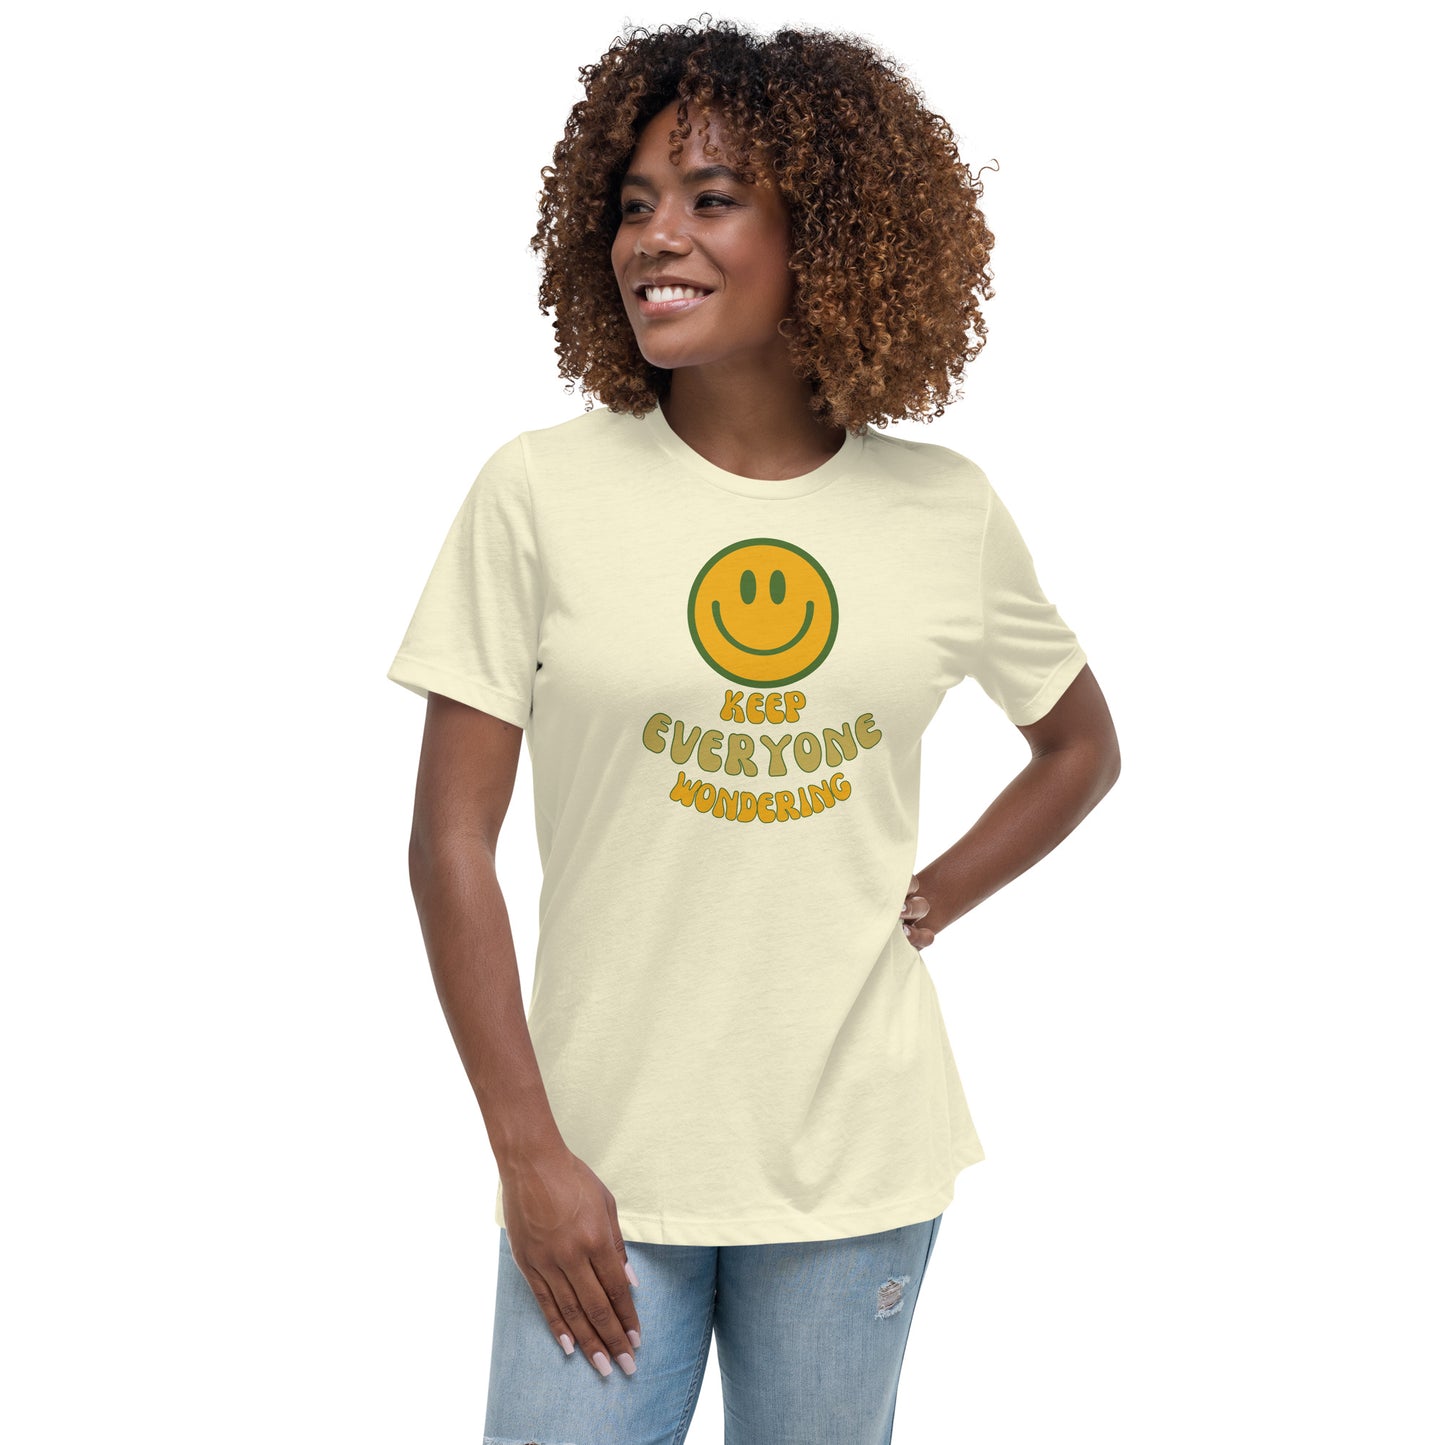 (SMILE) Keep Everyone Wondering Women's Relaxed T-Shirt